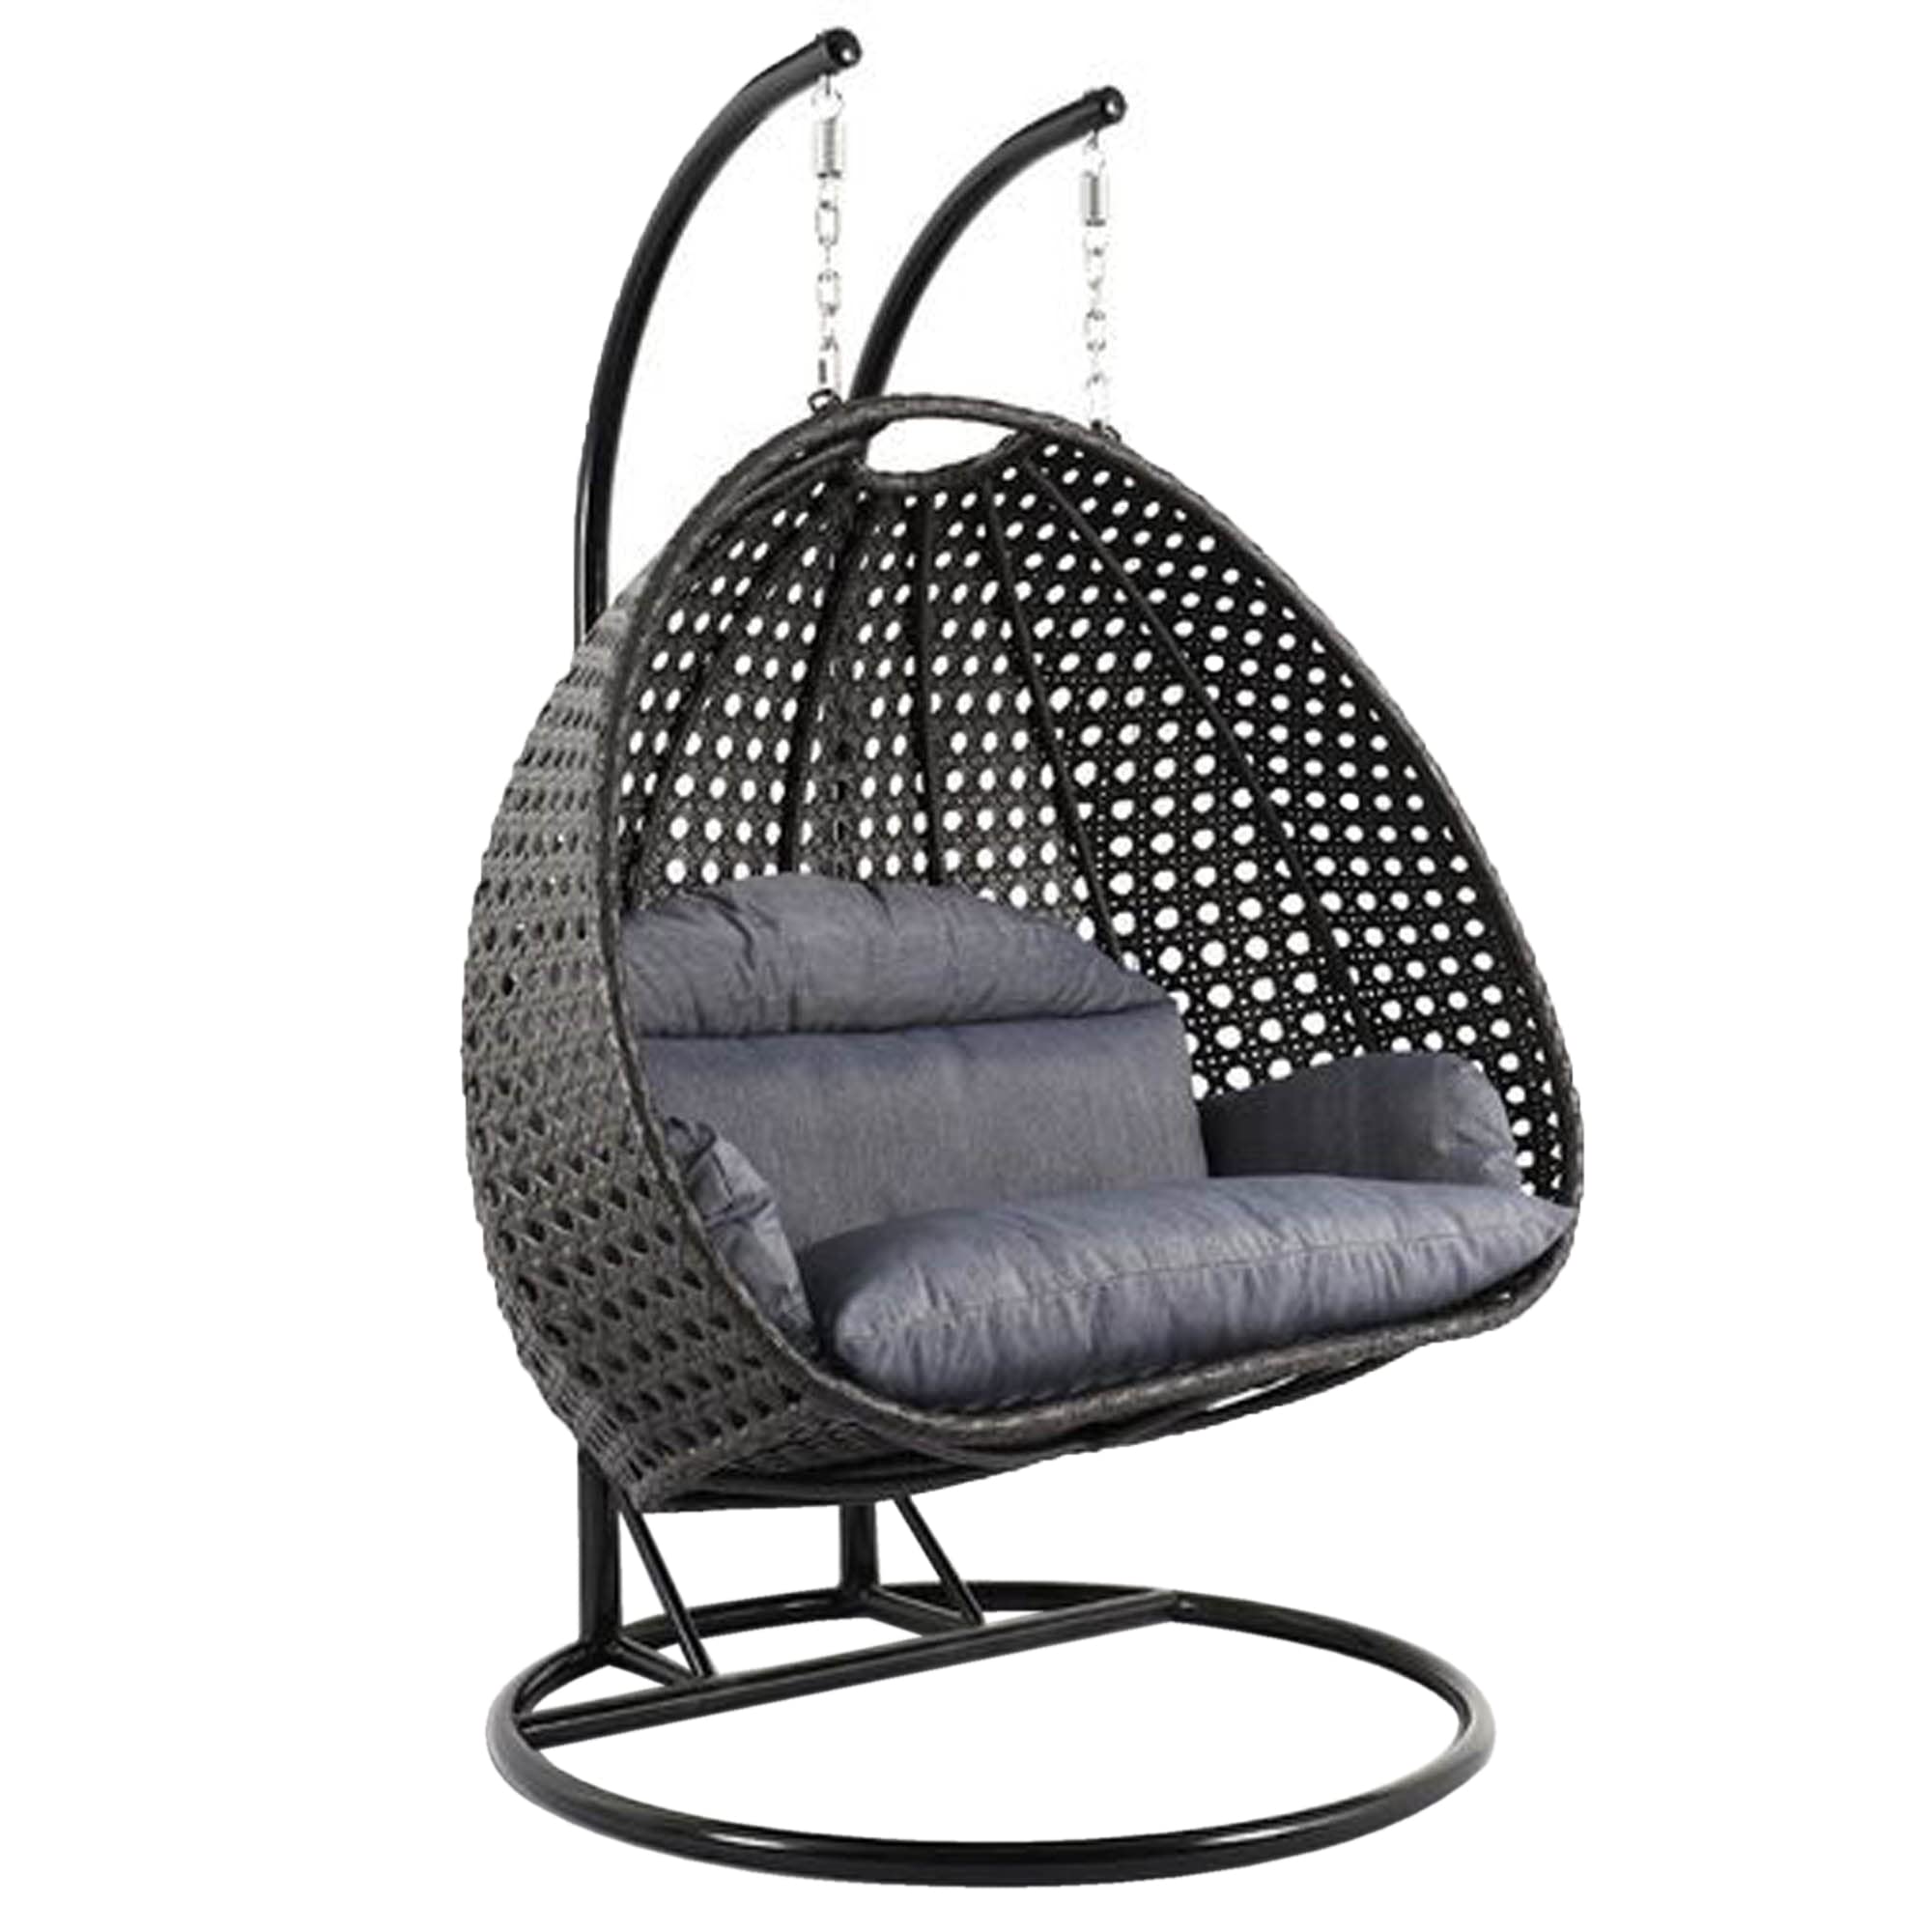 2-person wicker egg chair with black stand and UV-resistant cushion (b